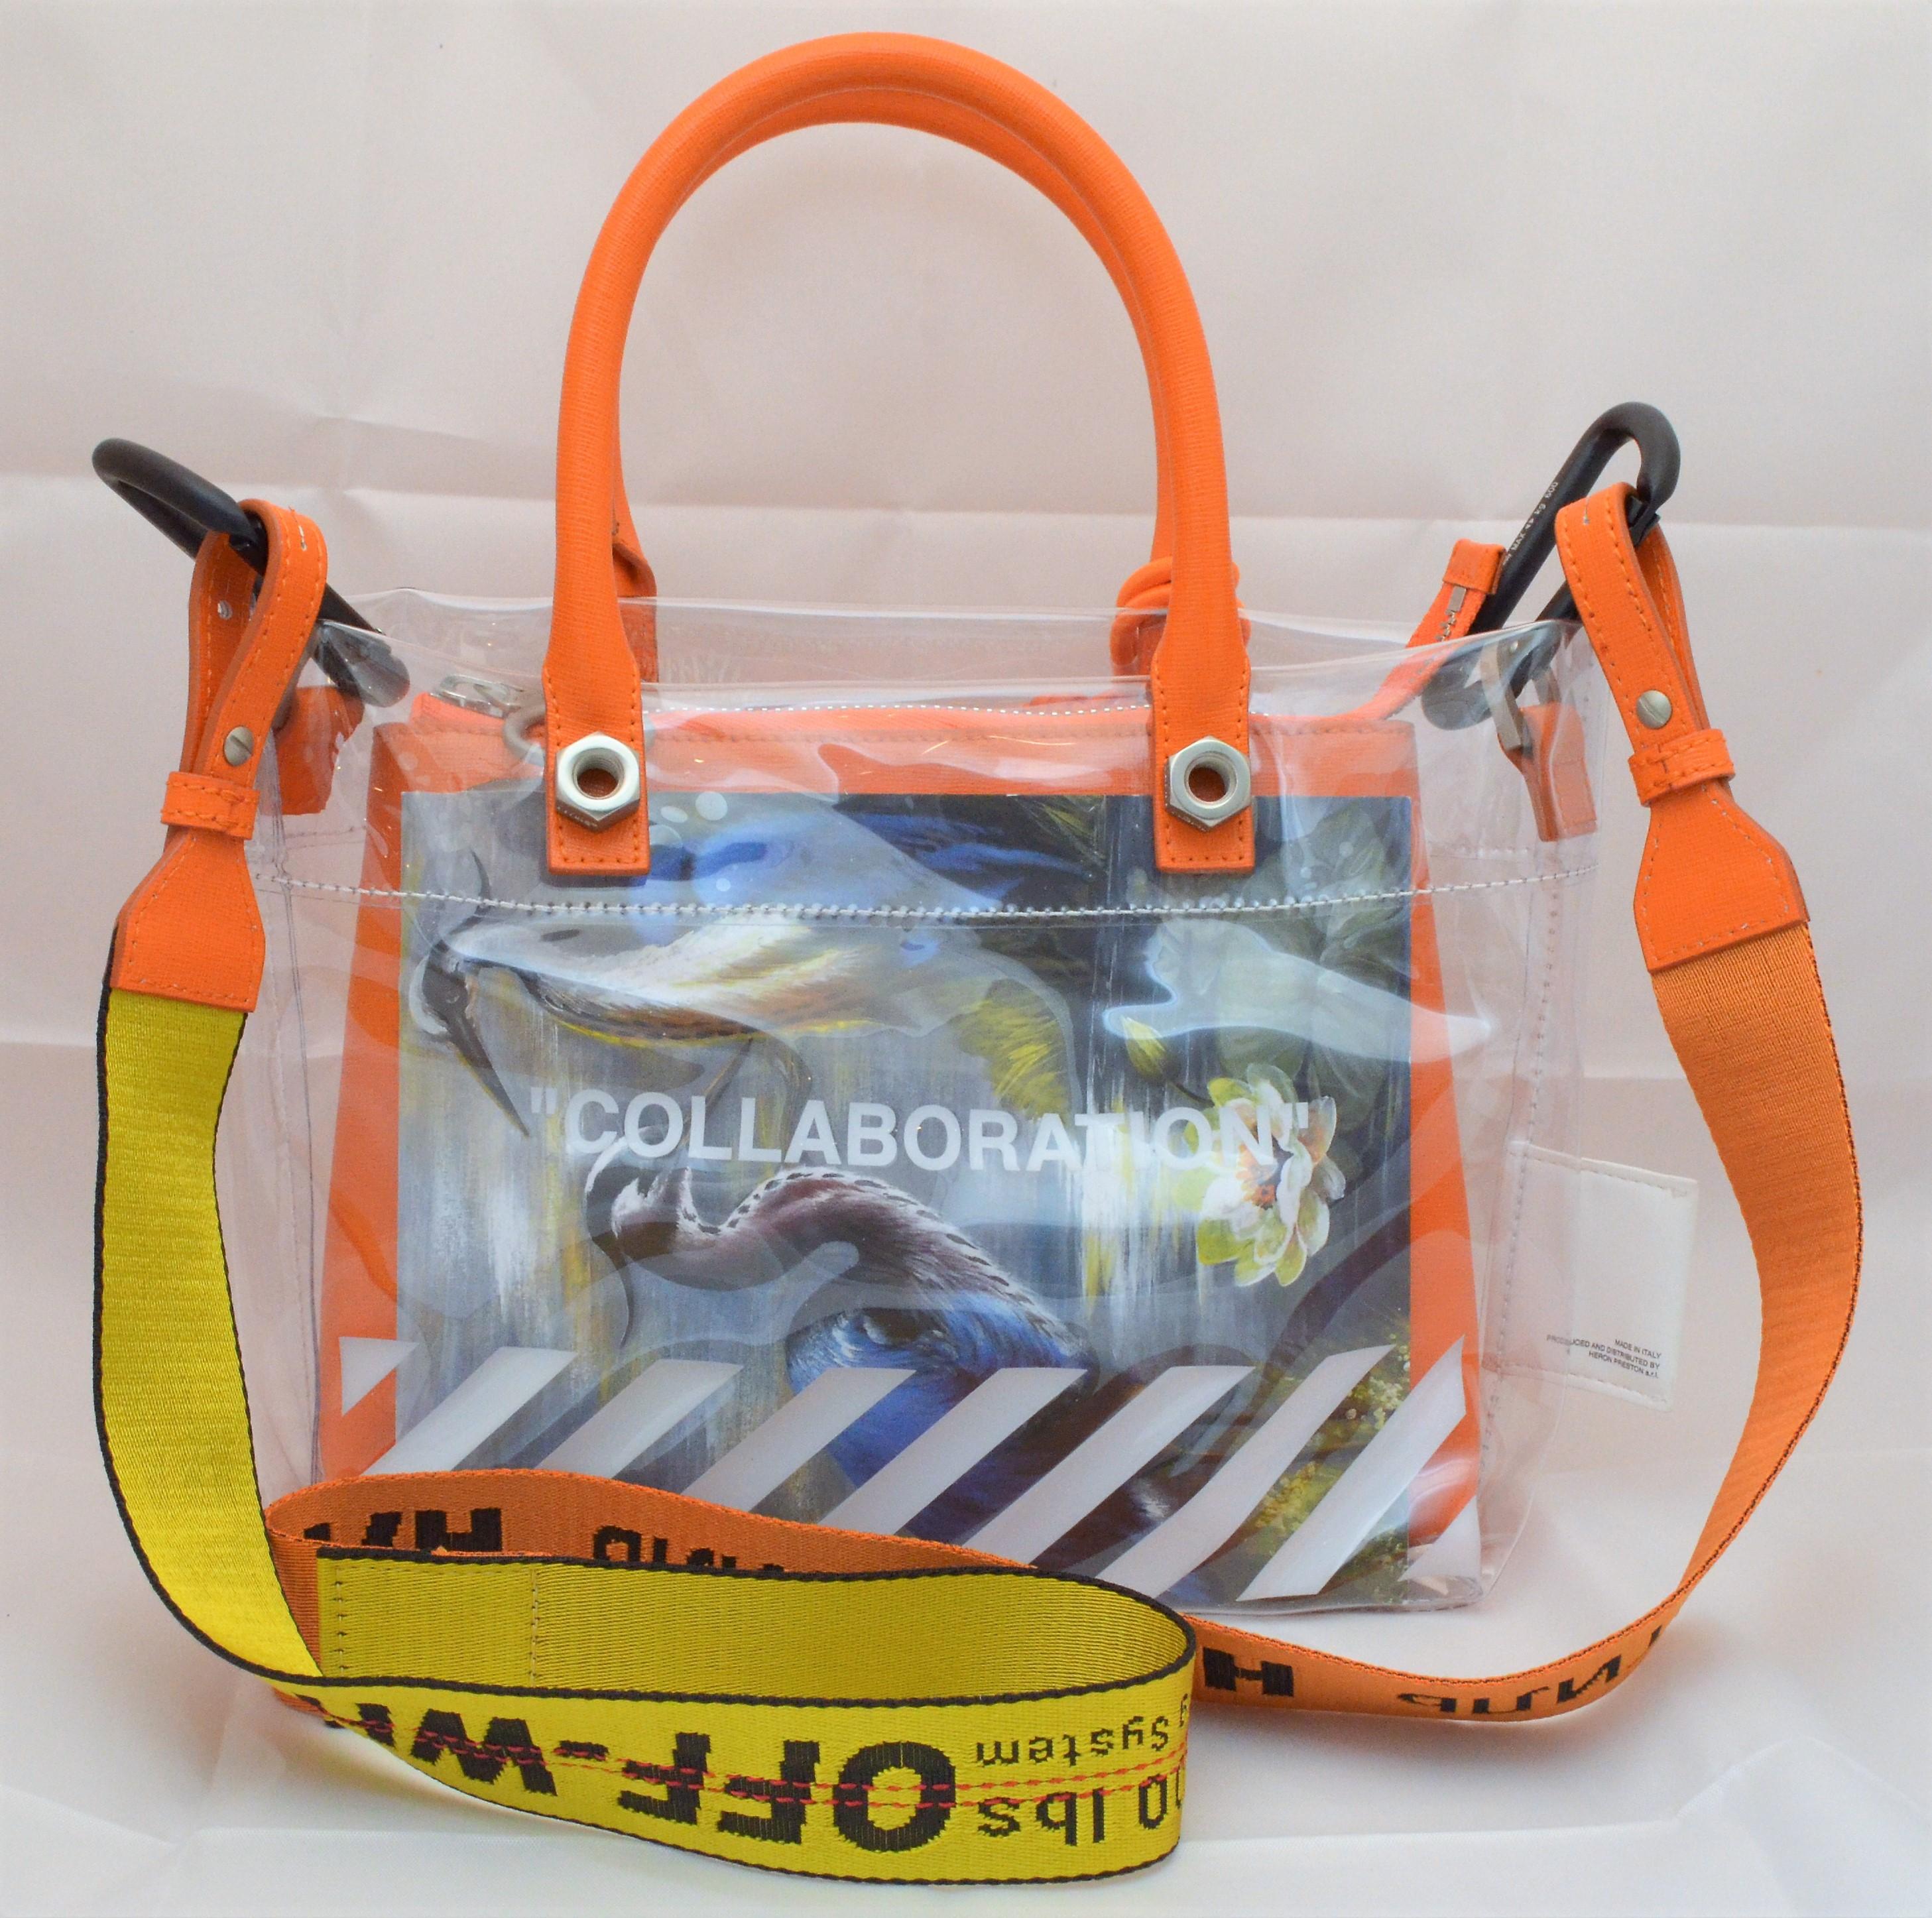 Off White x Heron Preston Collaboration Tote Bag with Industrial Shoulder Strap -- PVC tote with orange leather trimmings and dual rolled handles, removable industrial shoulder strap, orange and white leather zip pouch that is also removable, front